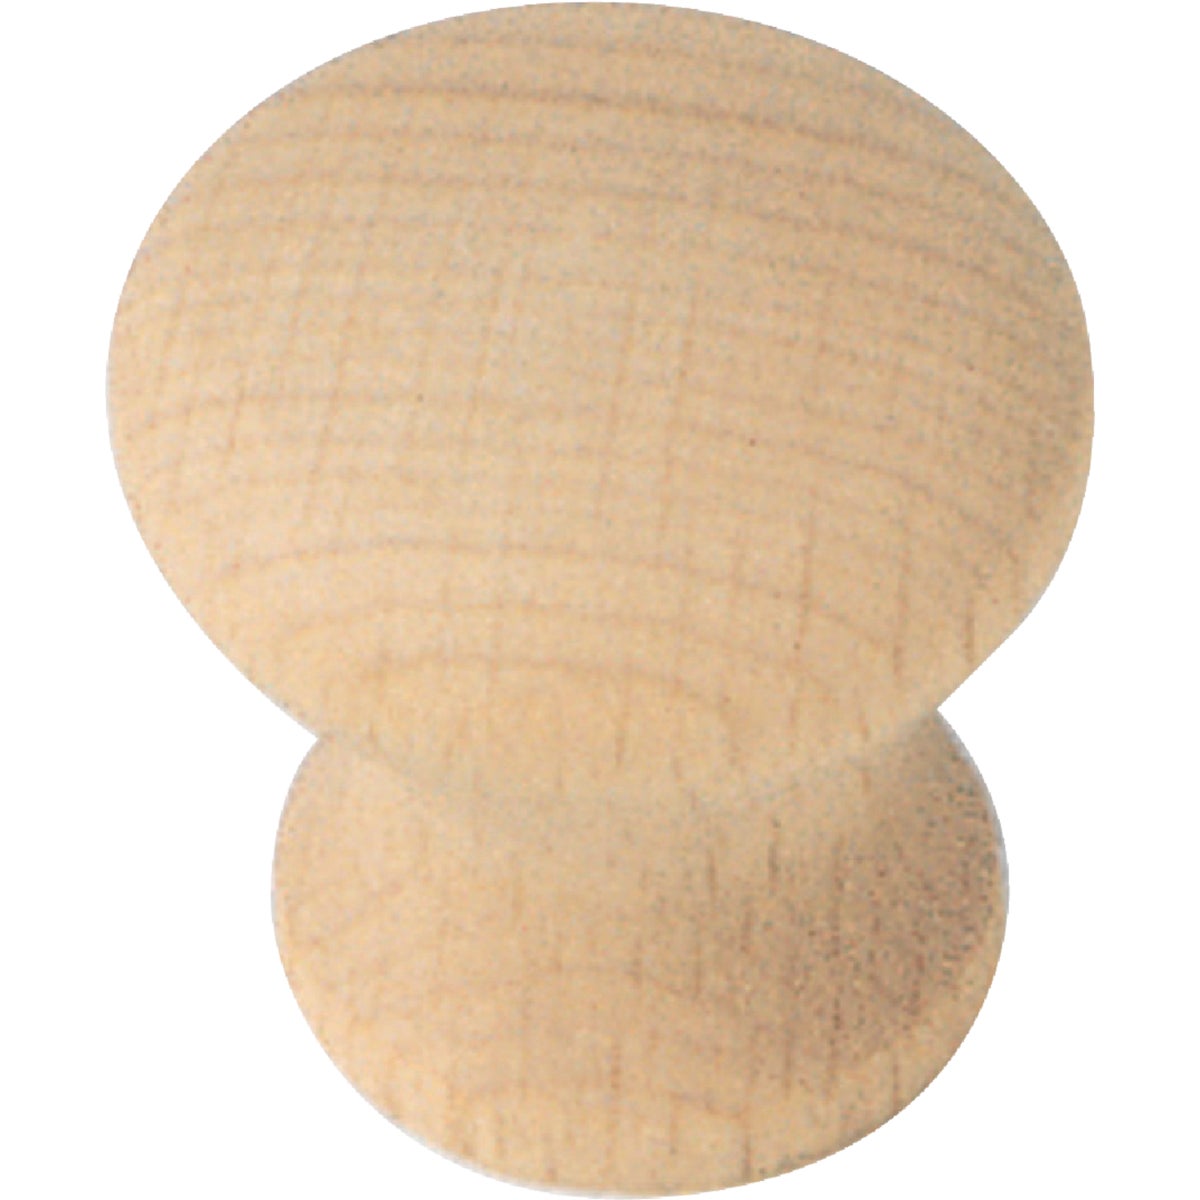 Item 216475, Enjoy the beauty of nature with this all natural birch wood knob.